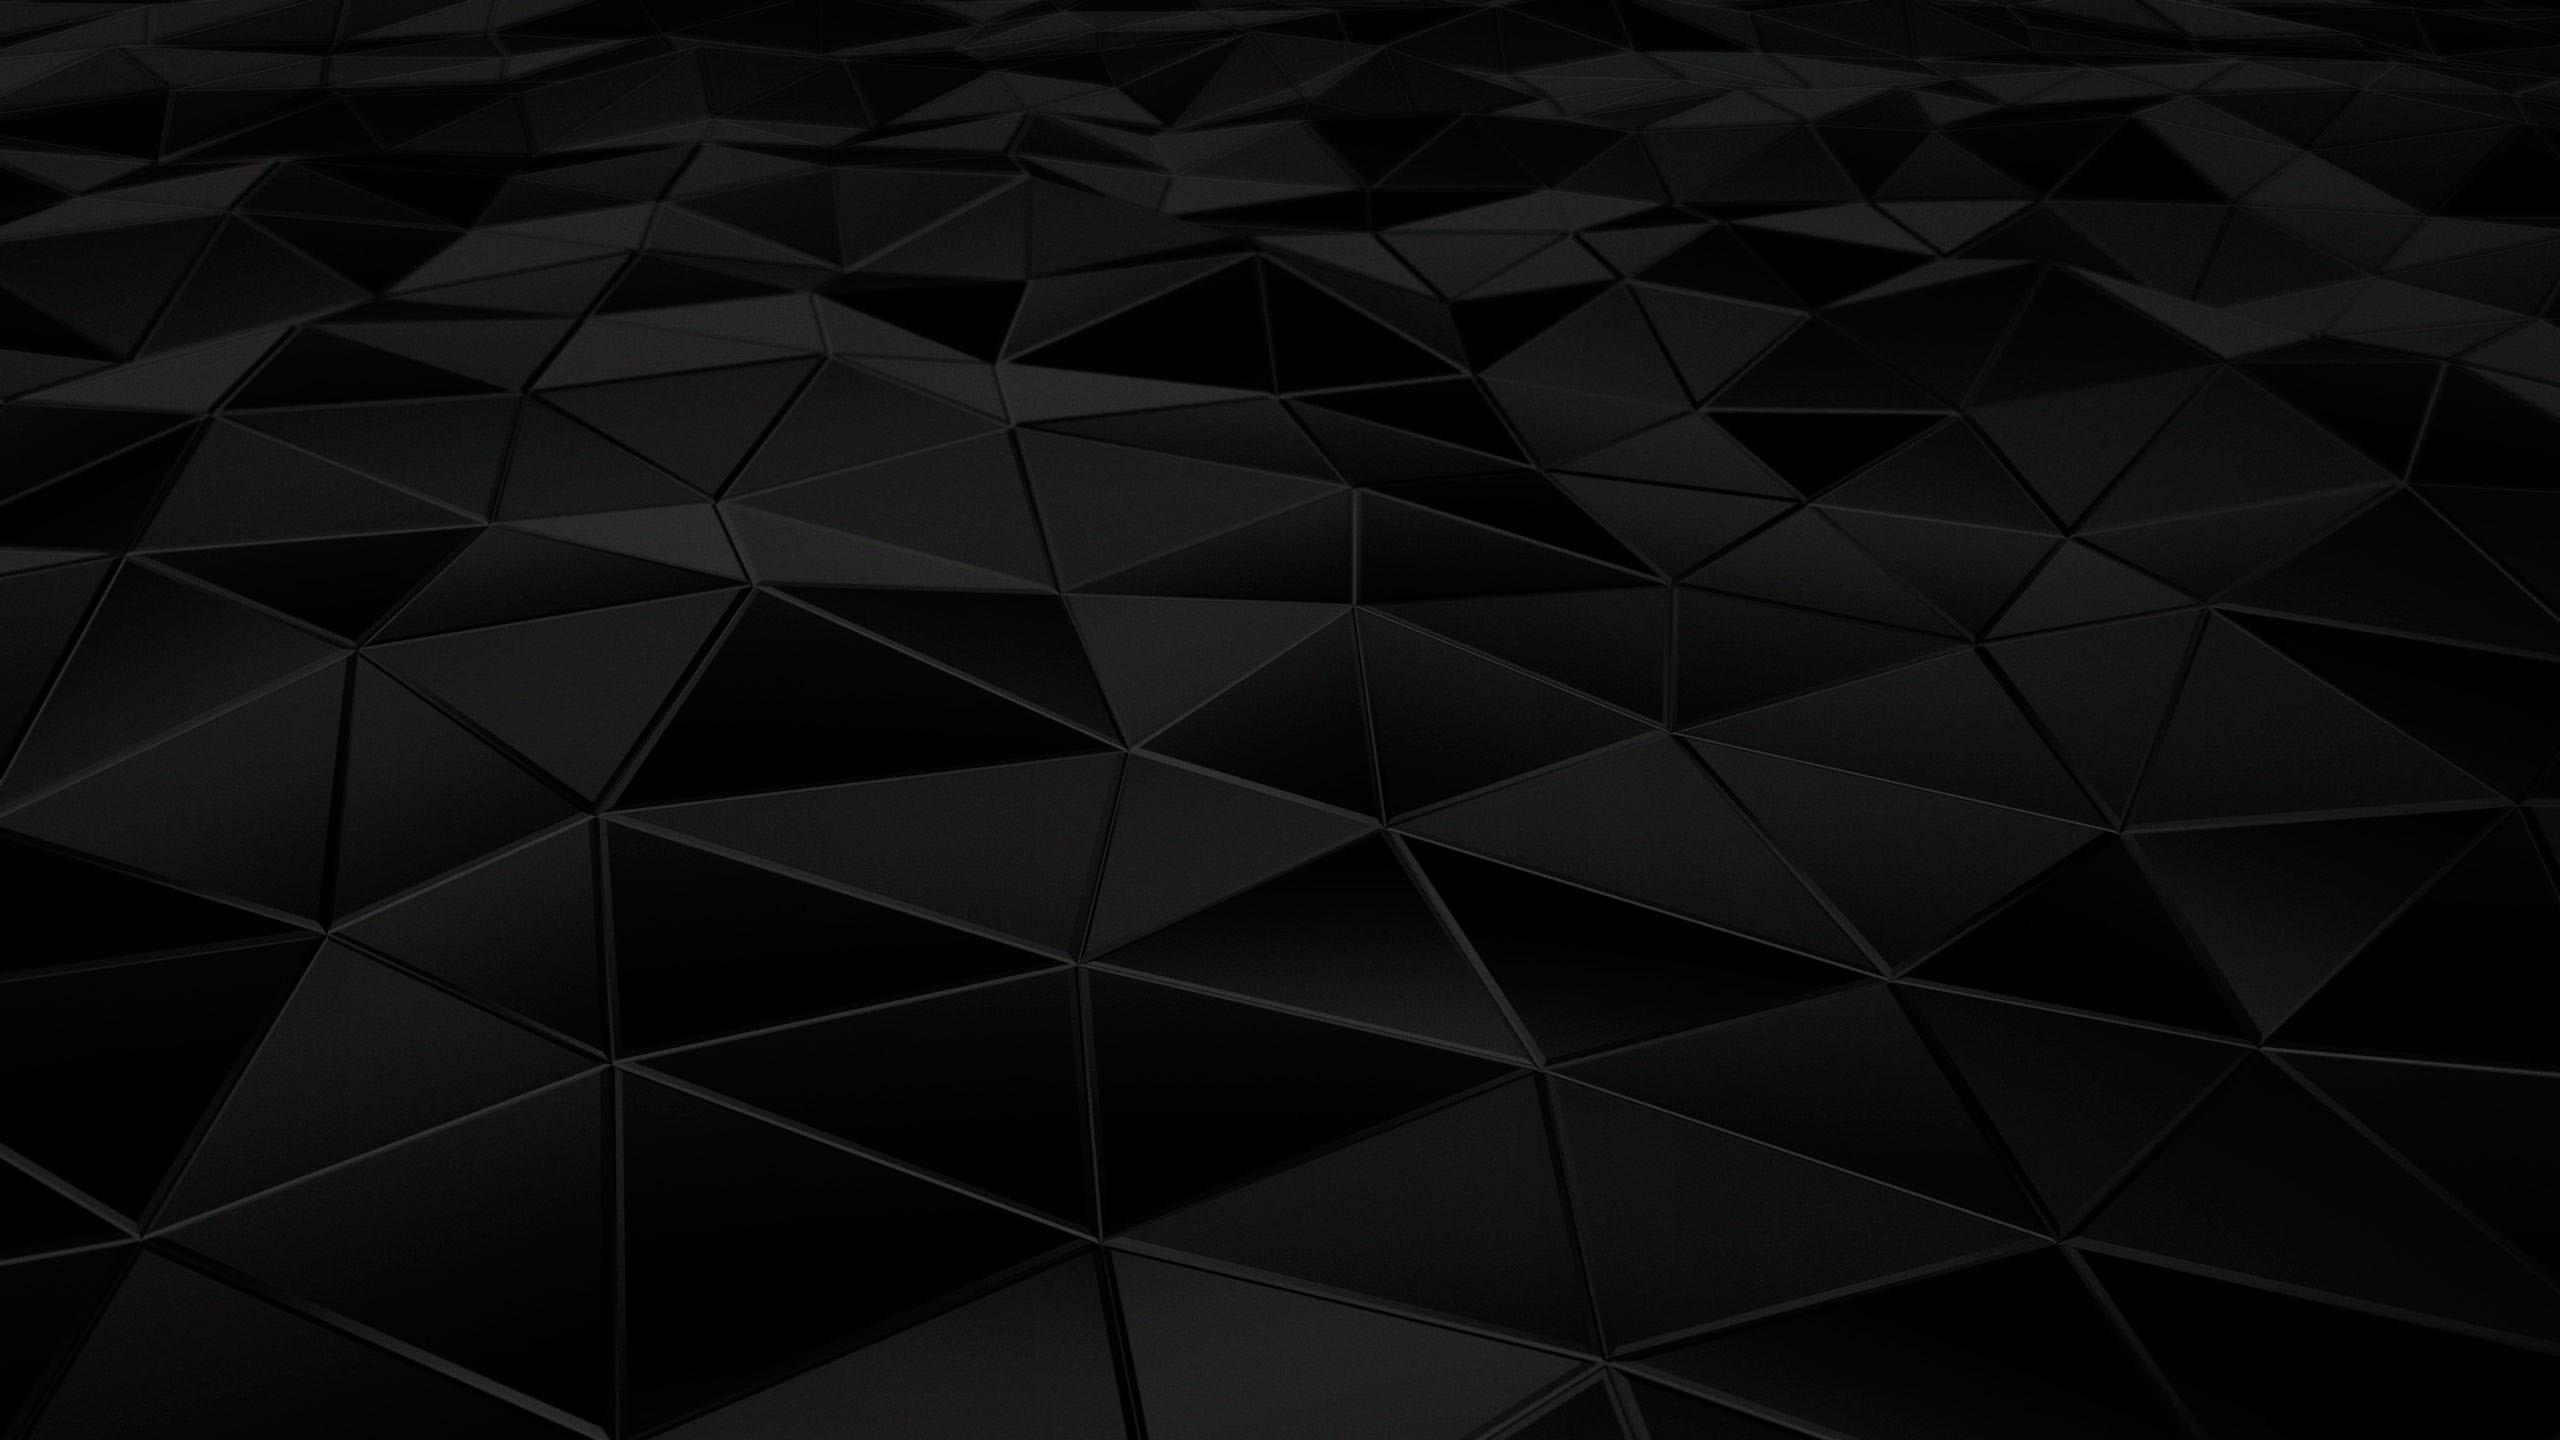 Black Abstract Wallpaper Image Photos Pictures Background